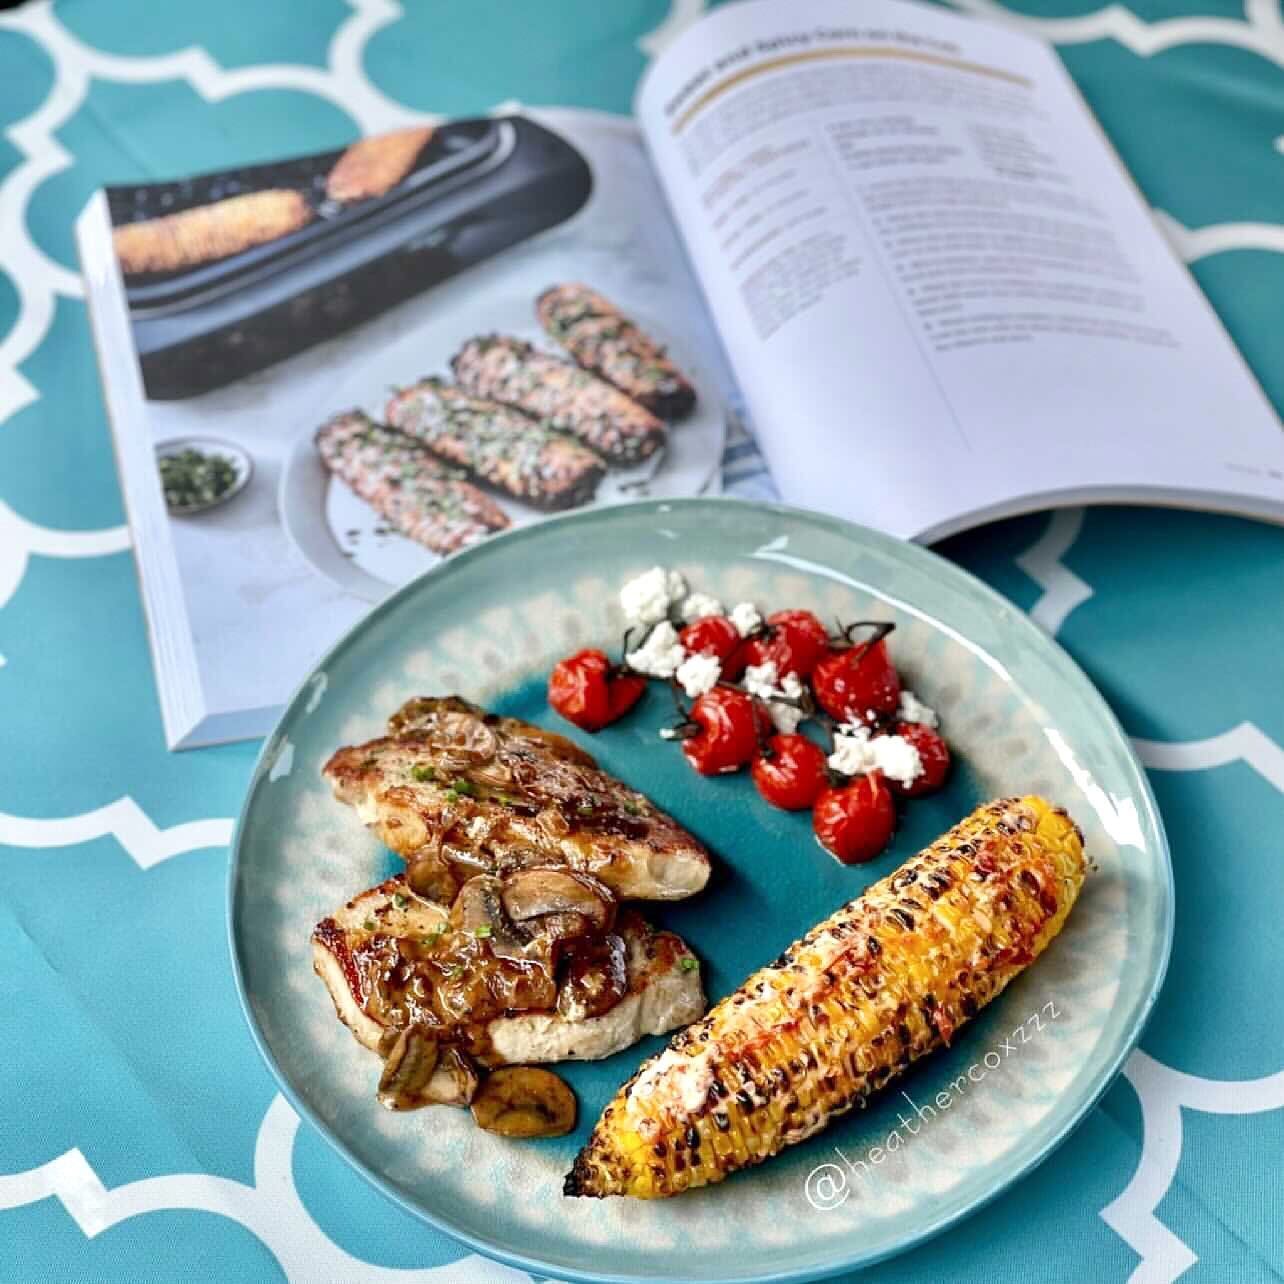 French Onion Pork Chops with Grilled Sweet and Spicy Corn. 
@heathercoxzzz made an amazing meal using inspiration from my cookbook. Sometimes you have no idea what to make so why not look through the 150 recipes and find something! This is a prime ex